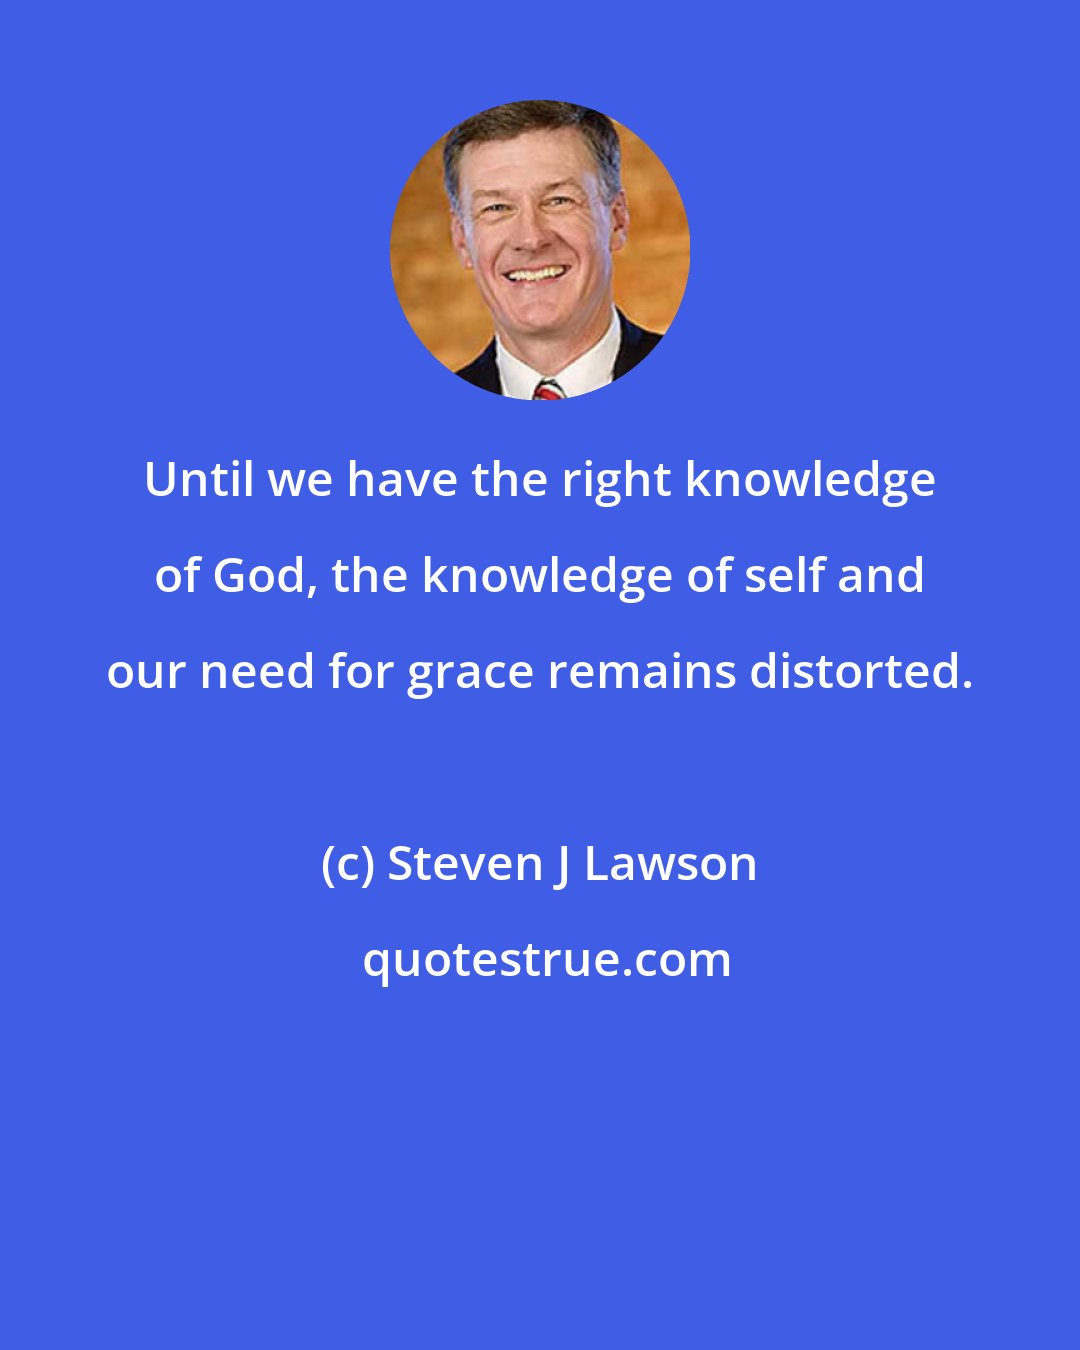 Steven J Lawson: Until we have the right knowledge of God, the knowledge of self and our need for grace remains distorted.